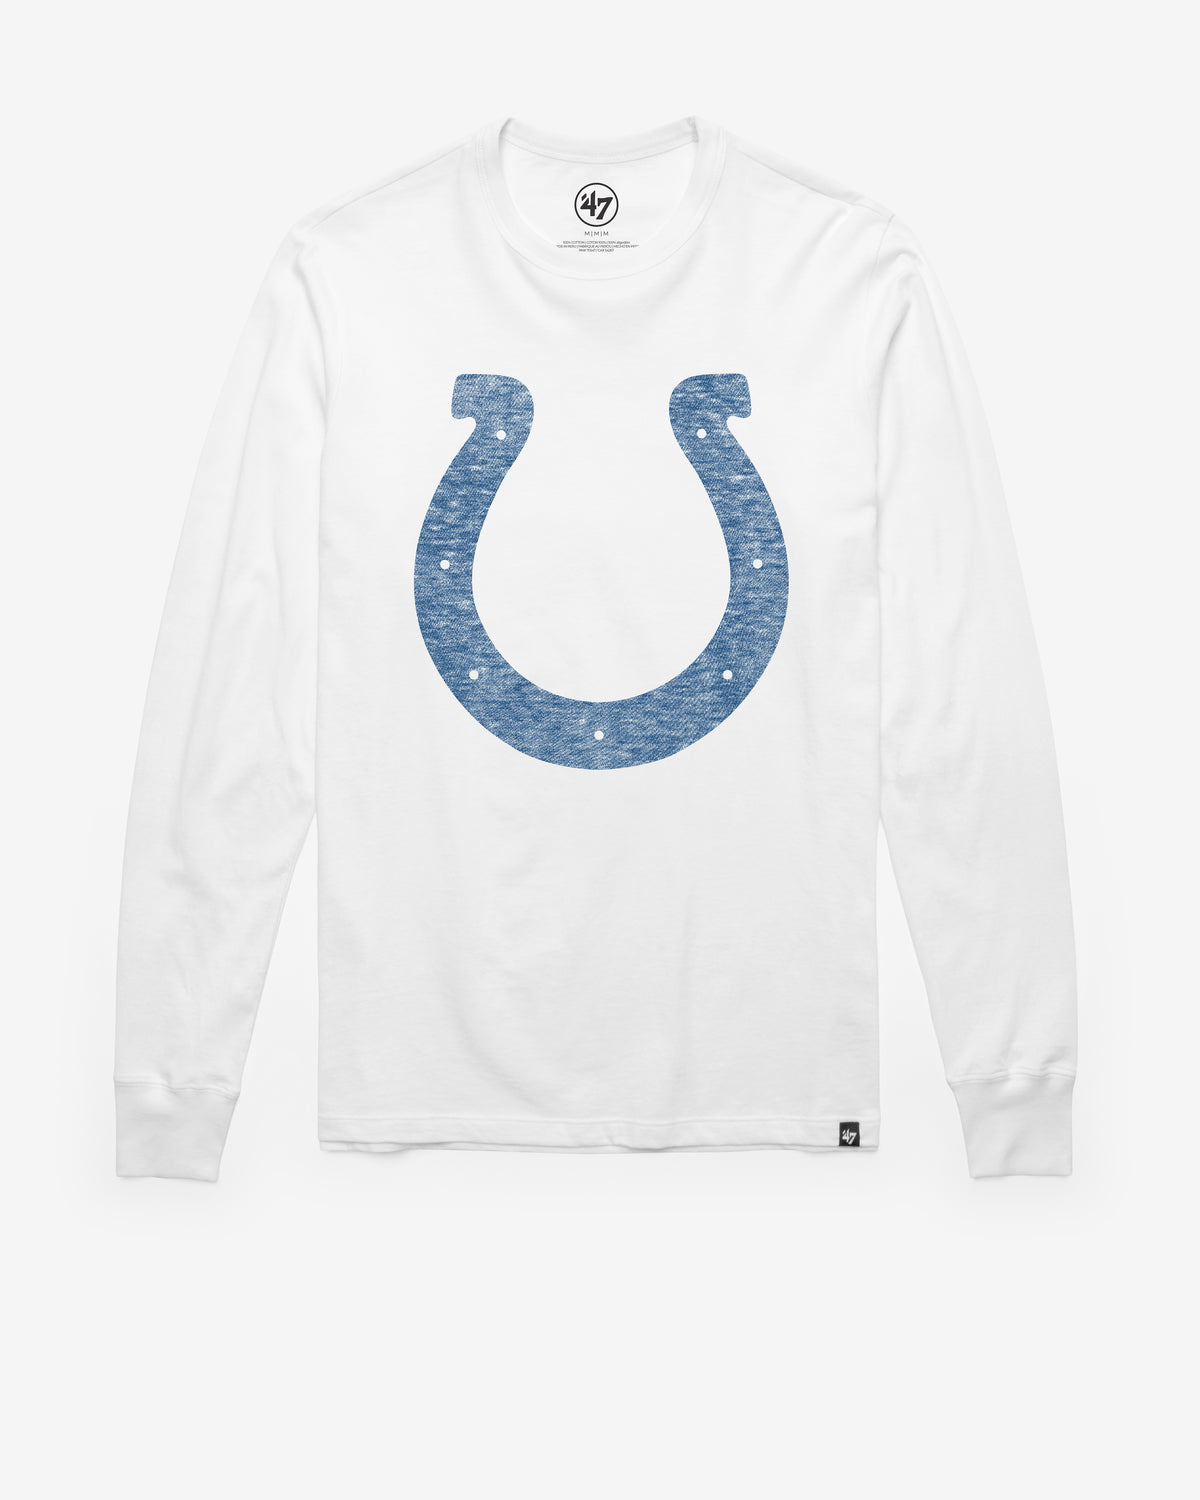 INDIANAPOLIS COLTS PREMIER '47 FRANKLIN LONG SLEEVE TEE